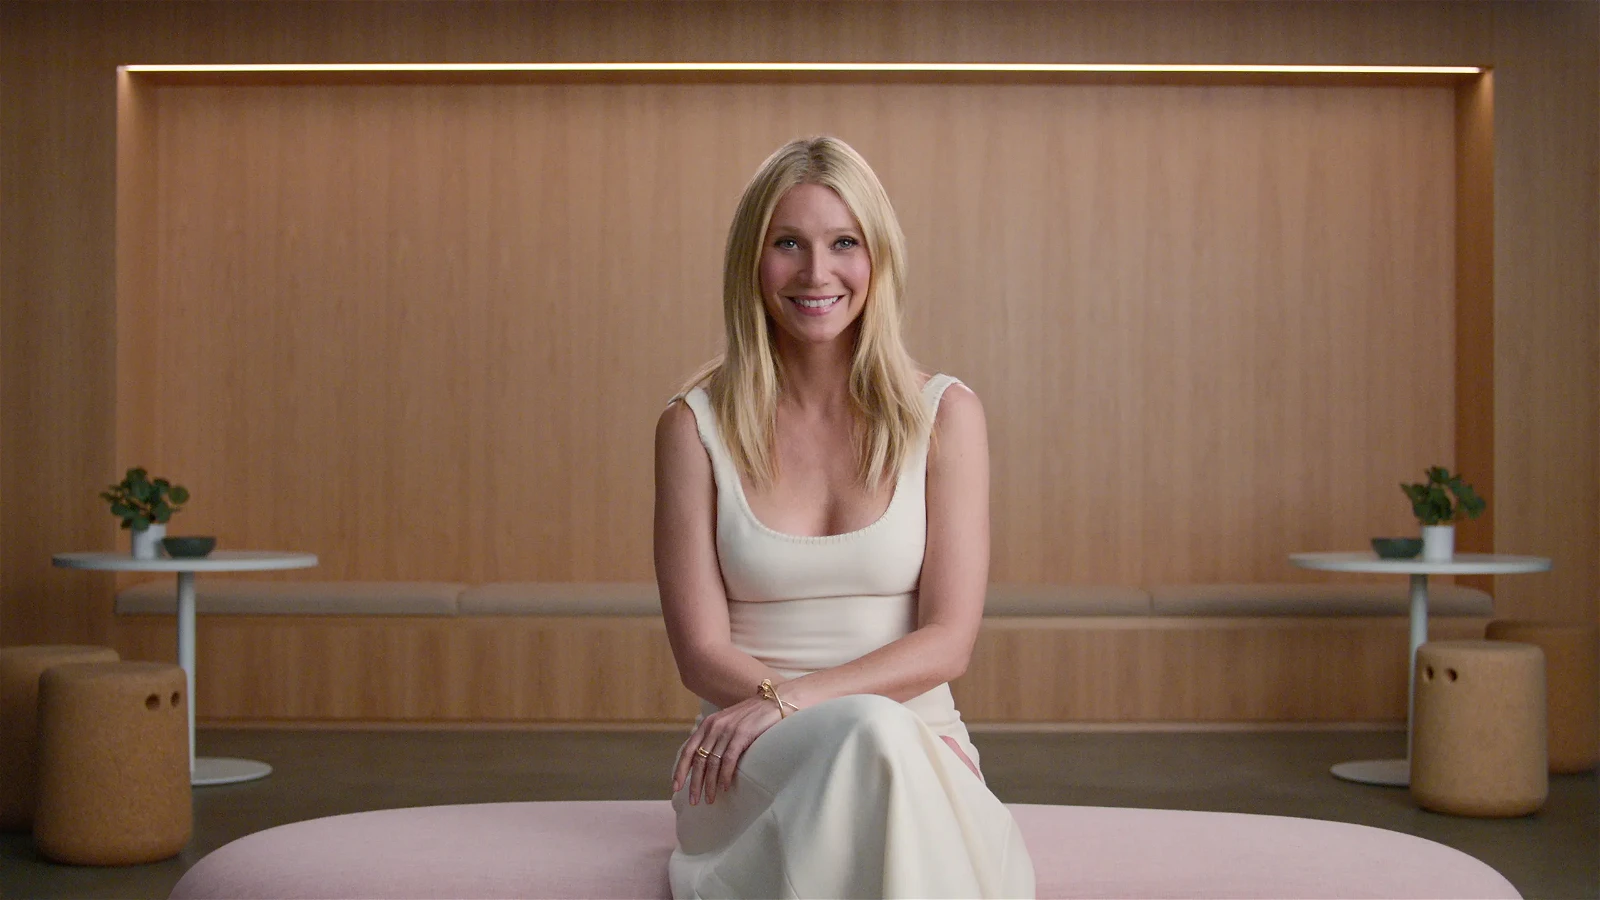 Gwyneth Paltrow in a promotion image for her company Goop